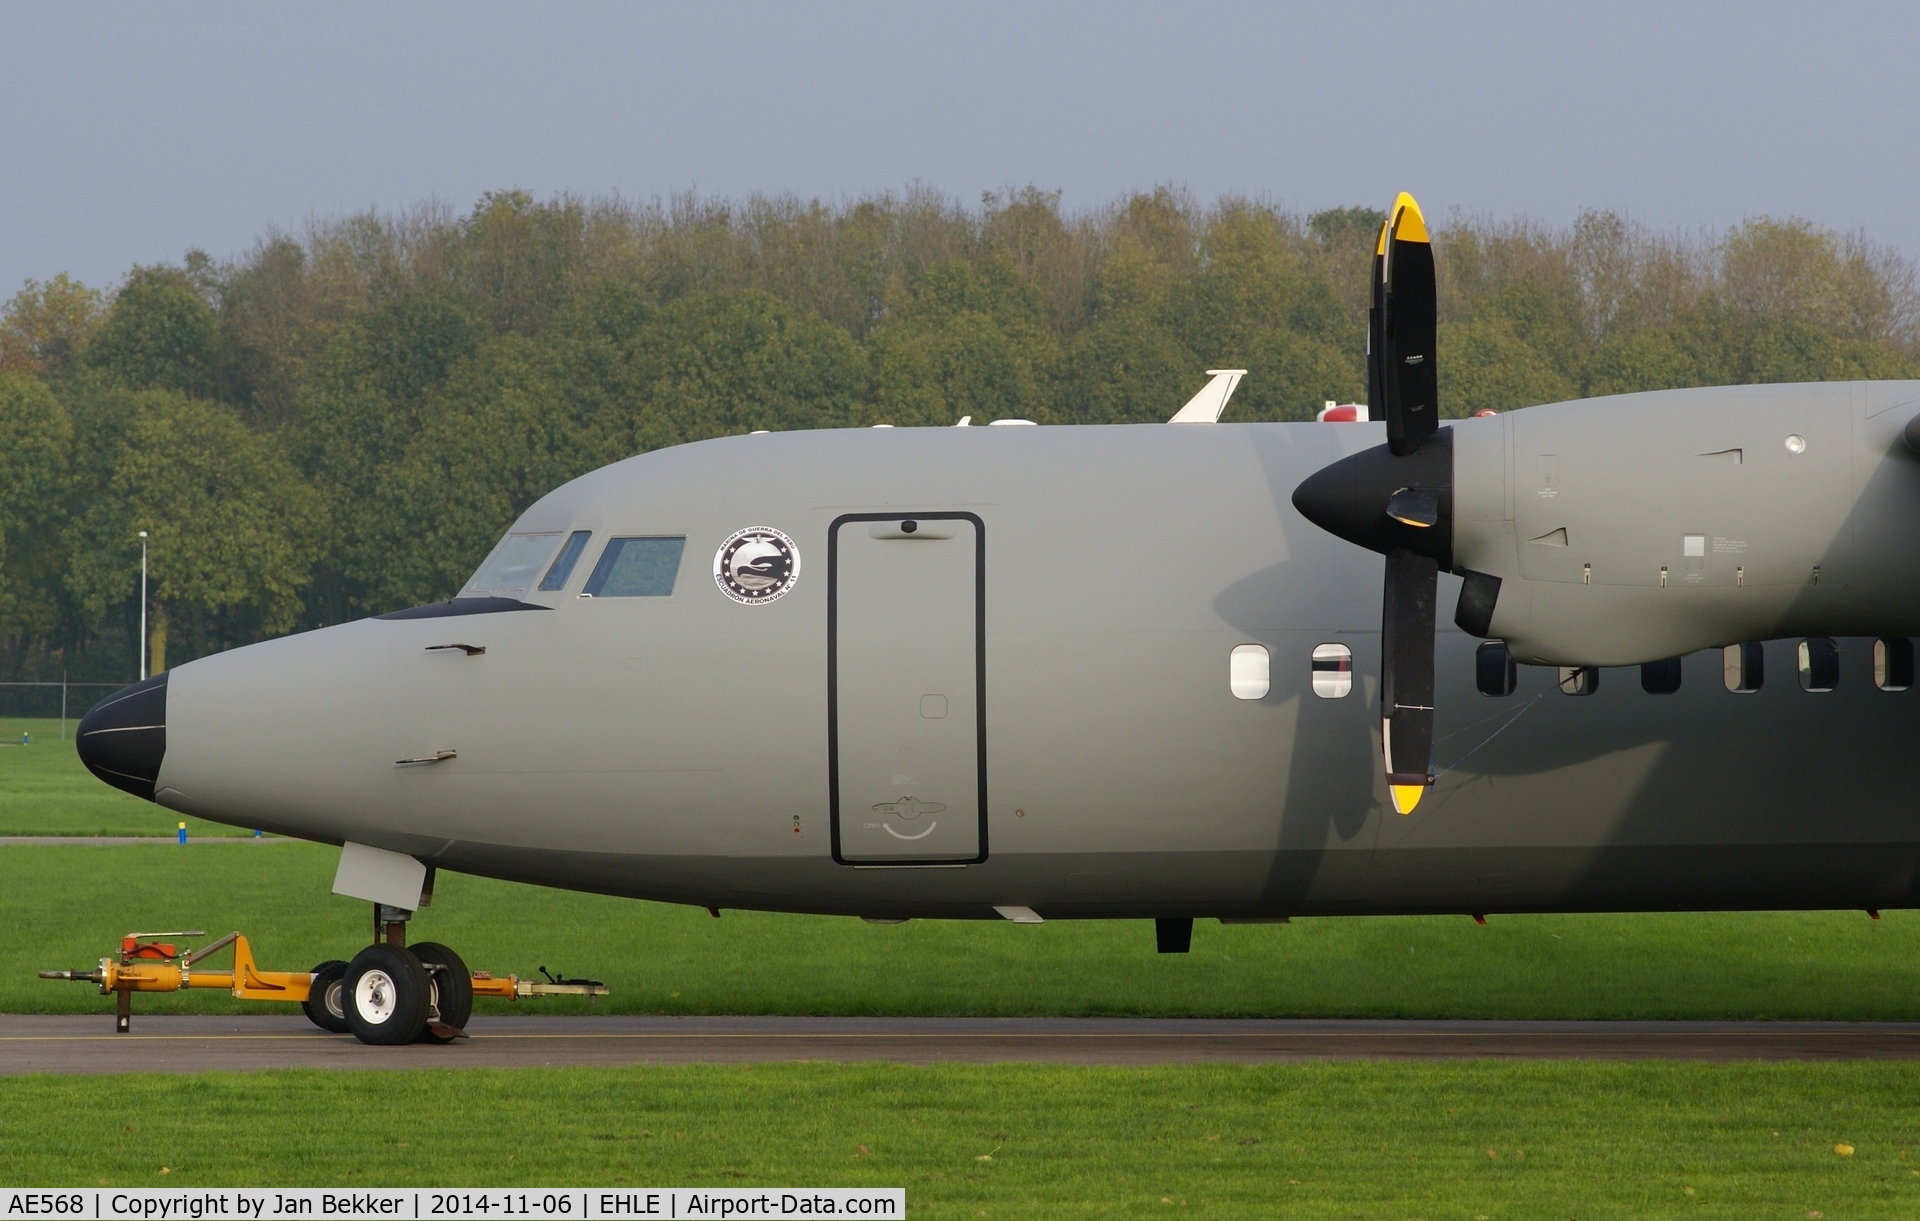 AE568, 1993 Fokker 50 C/N 20287, Just got the livery of the Peruvian Navy. Former U-06 of the Royal Netherlands Airforce. The new registration is still taped over.